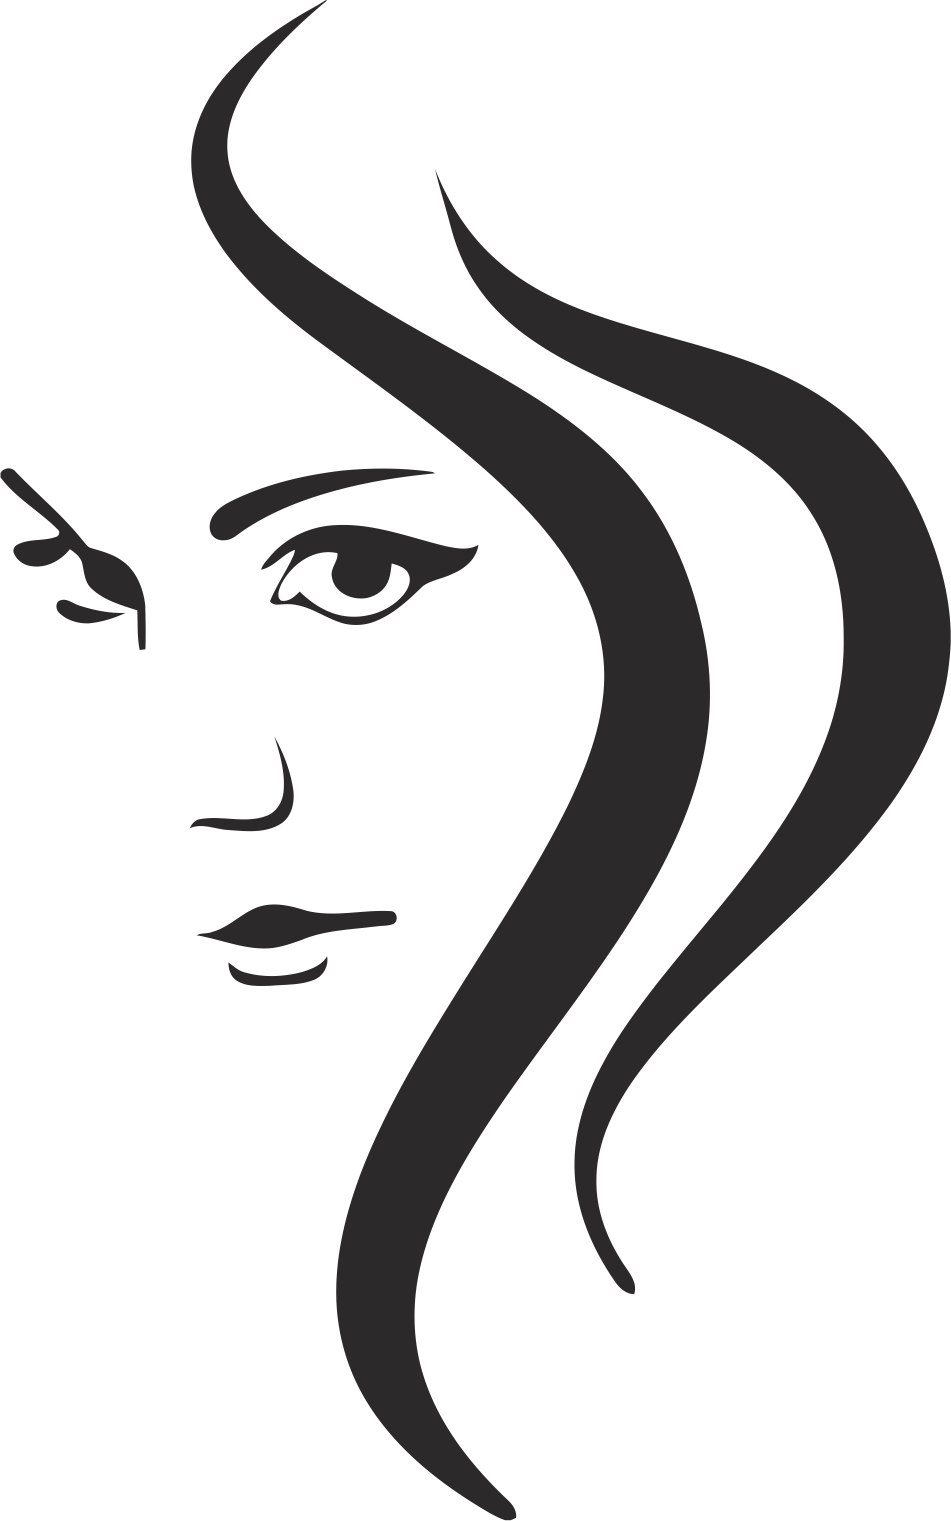 Woman Face Silhouette Free Vector : Free Vector Silhouette File Page 4 ...